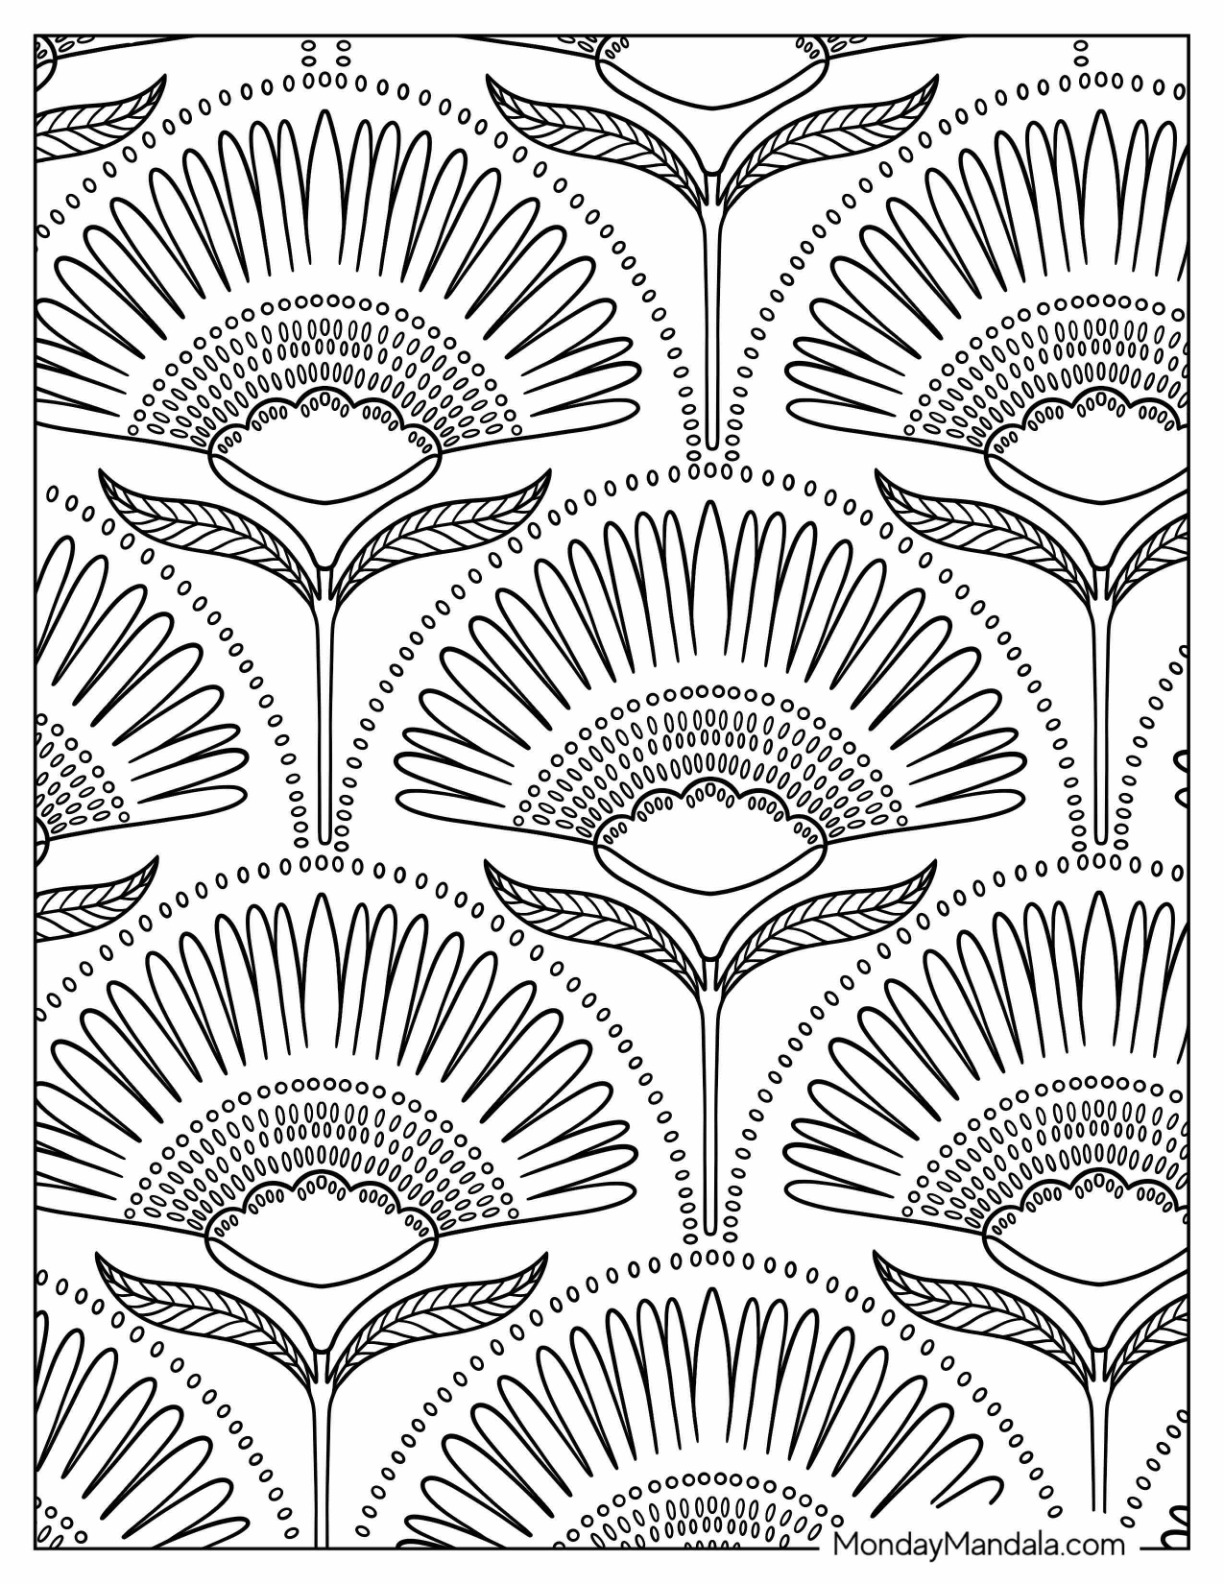 Pattern coloring pages free pdf printables